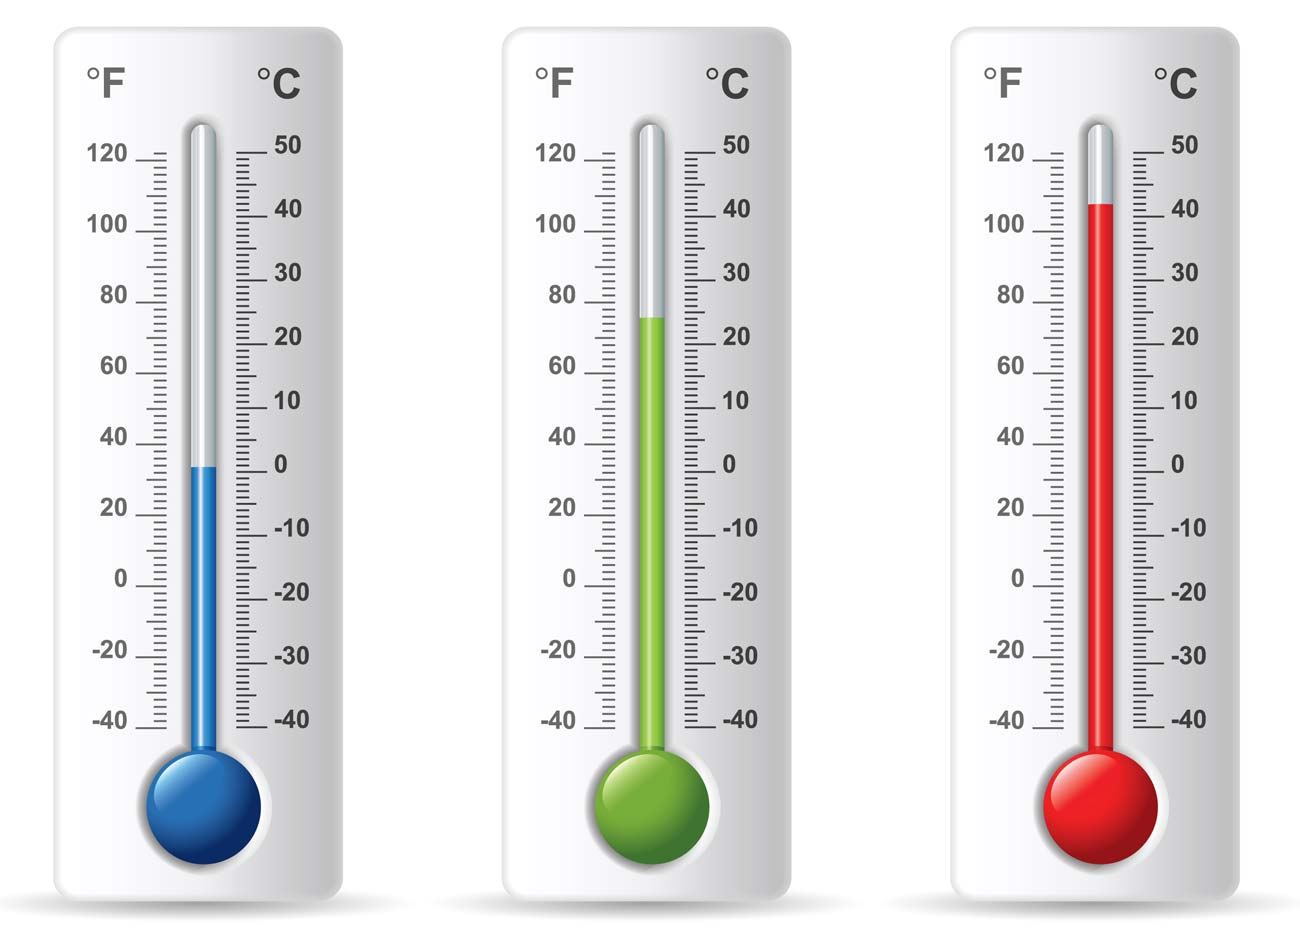 What is 37.0 degrees Celsius on the Fahrenheit scale?